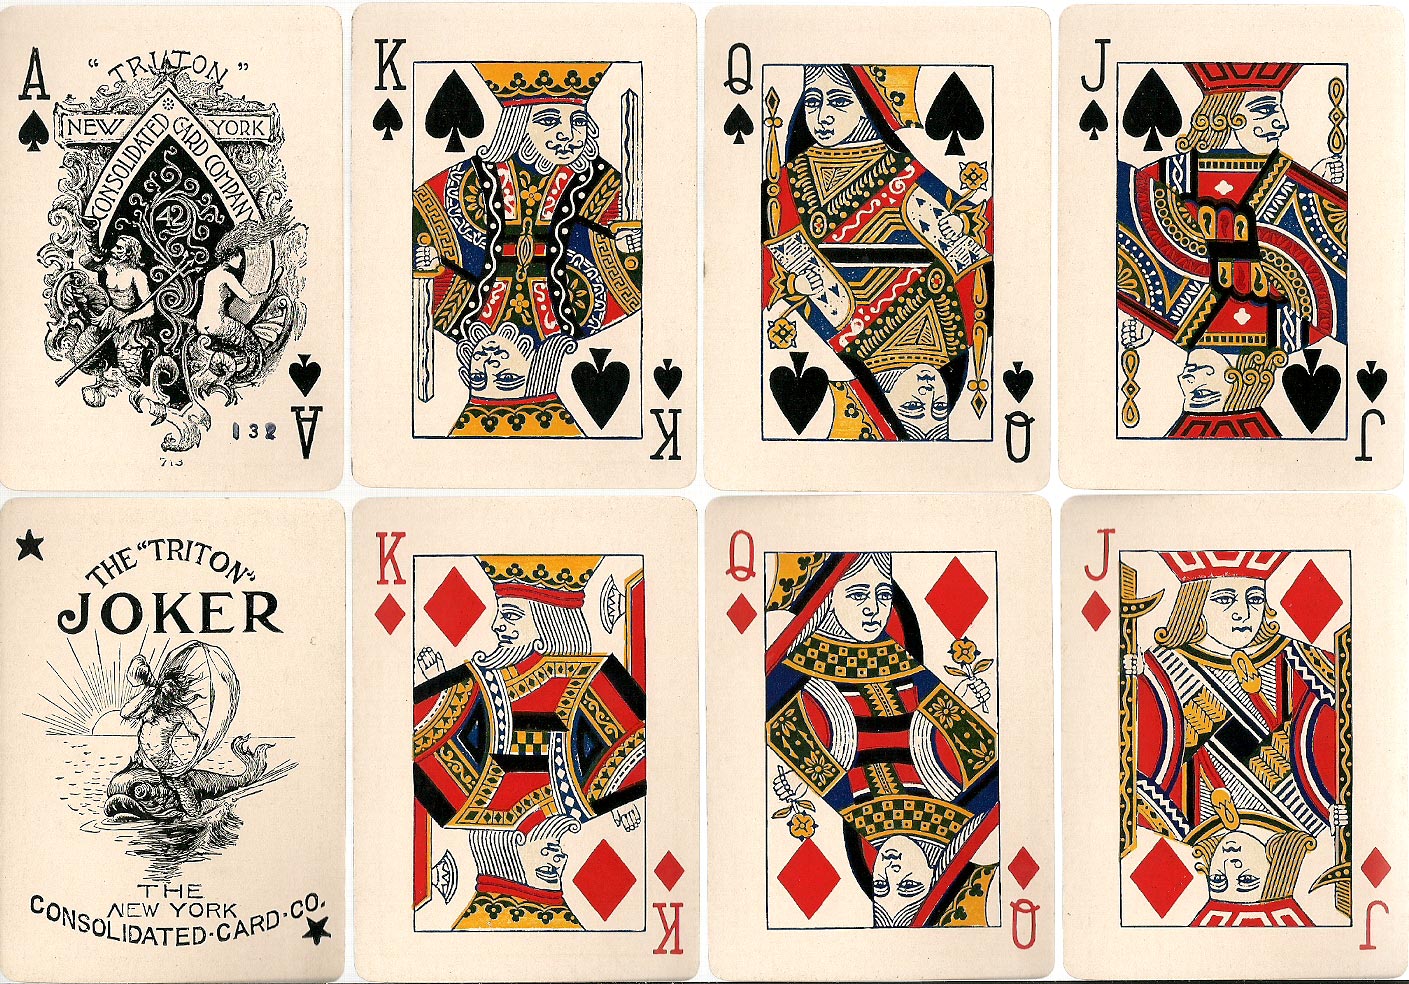 “Triton No.42” brand playing cards with the “Triton” Joker, c.1895